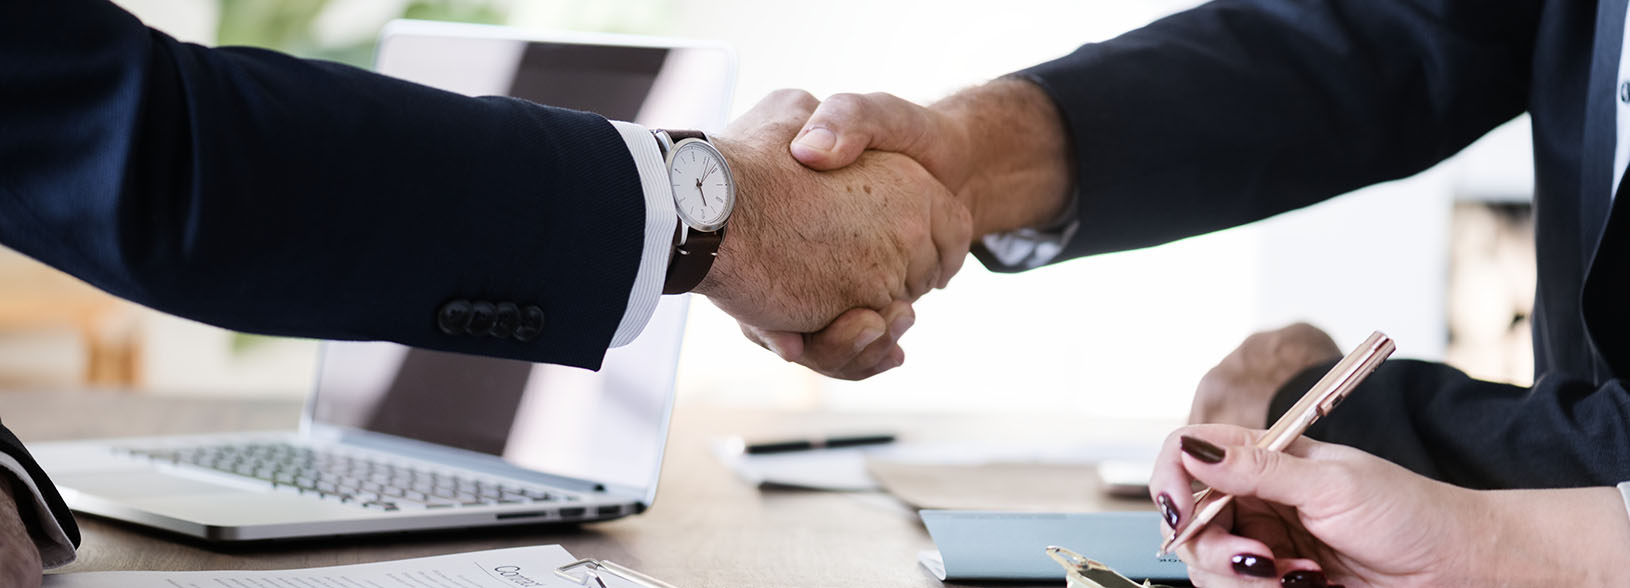 Two people shaking hands to secure a business deal